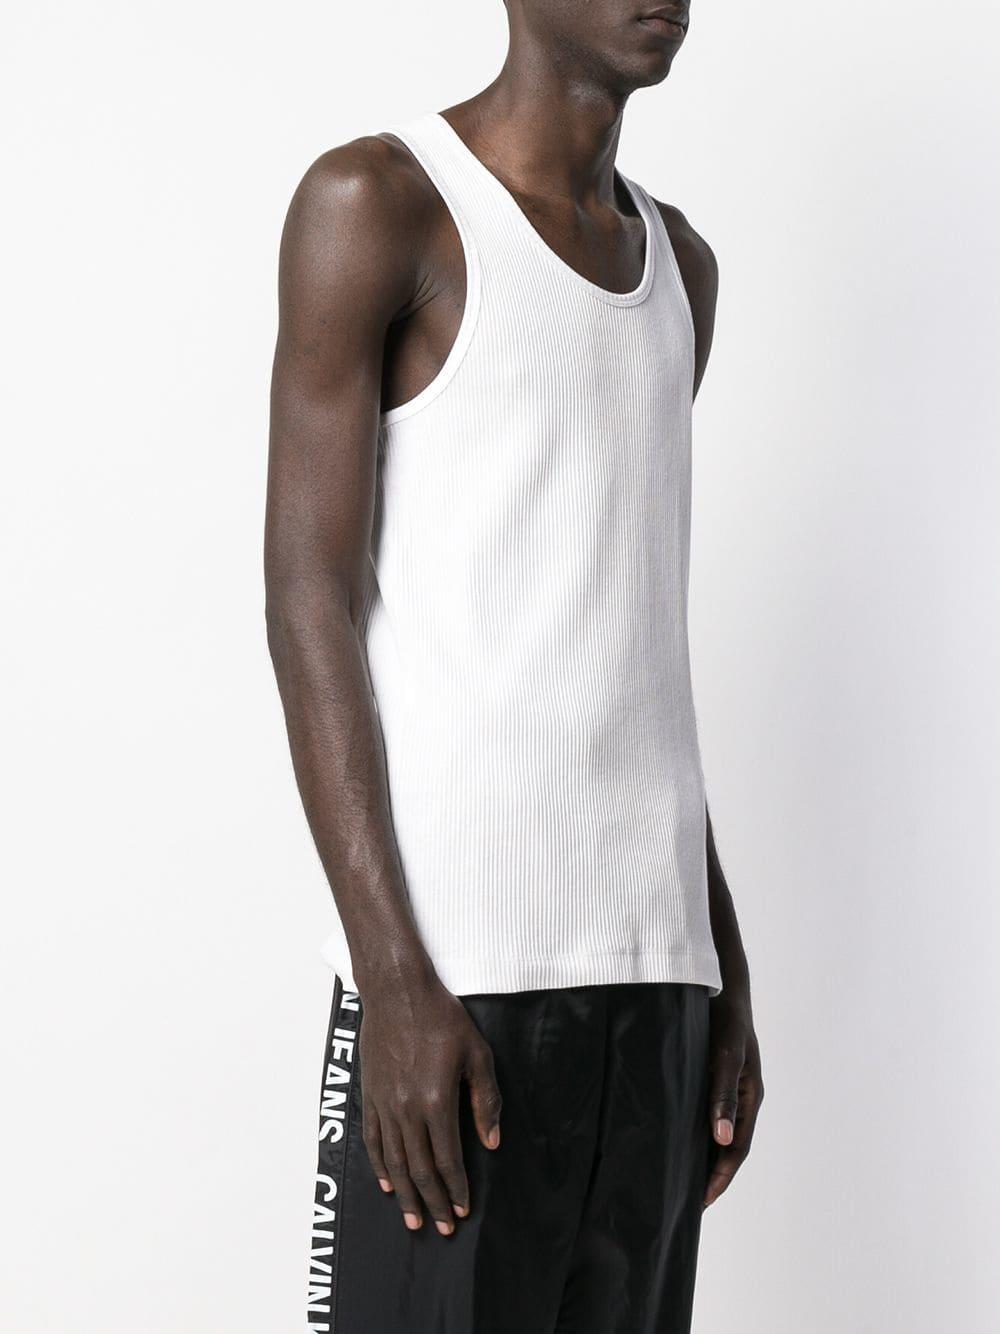 Calvin Klein Cotton Ribbed Vest Top in White for Men - Lyst